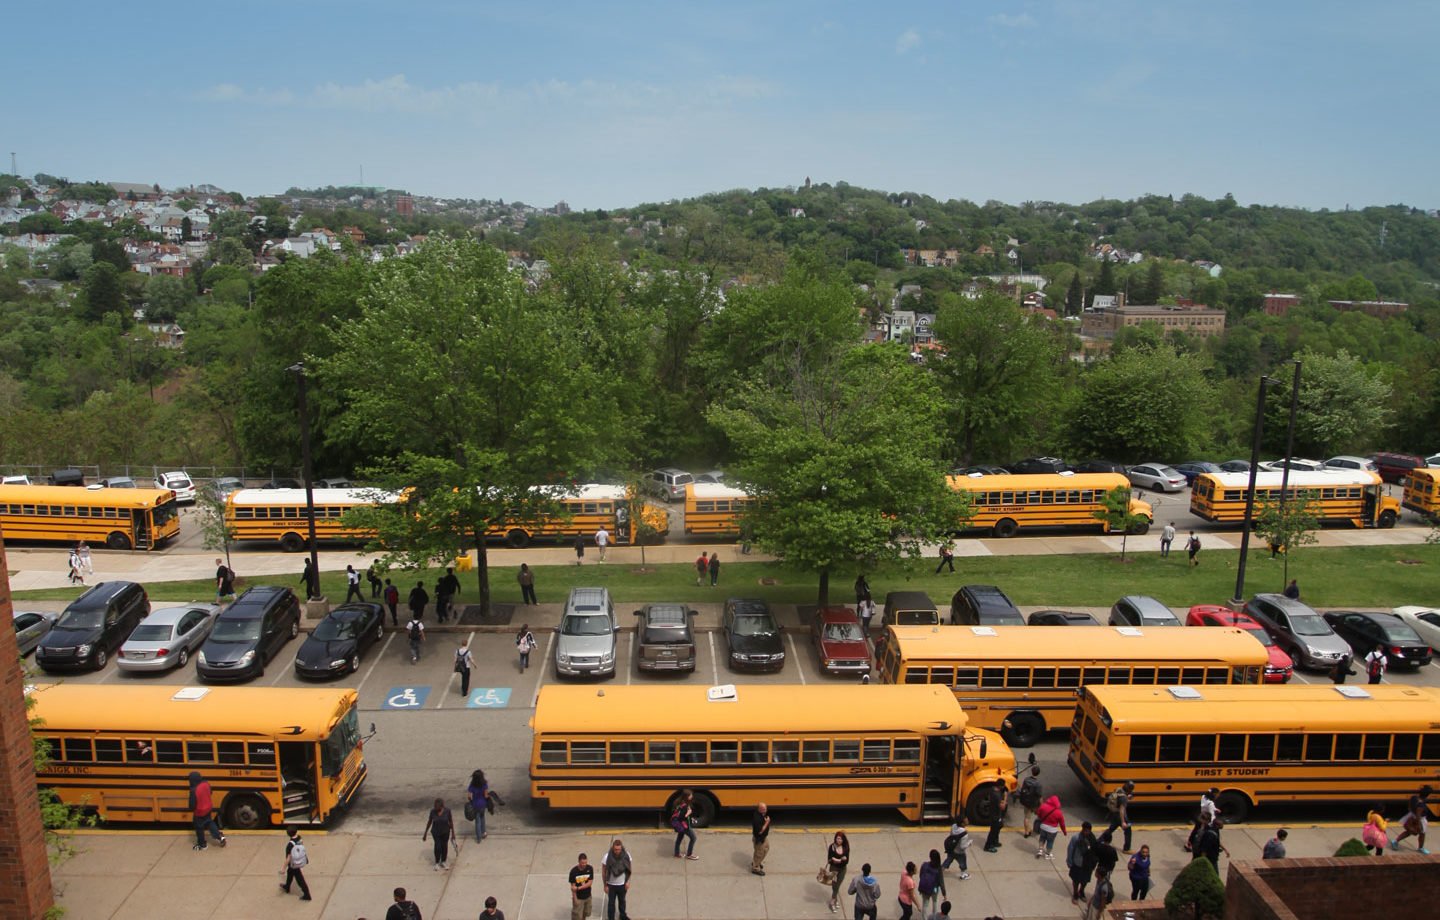 School children getting on buses at the end of a school day